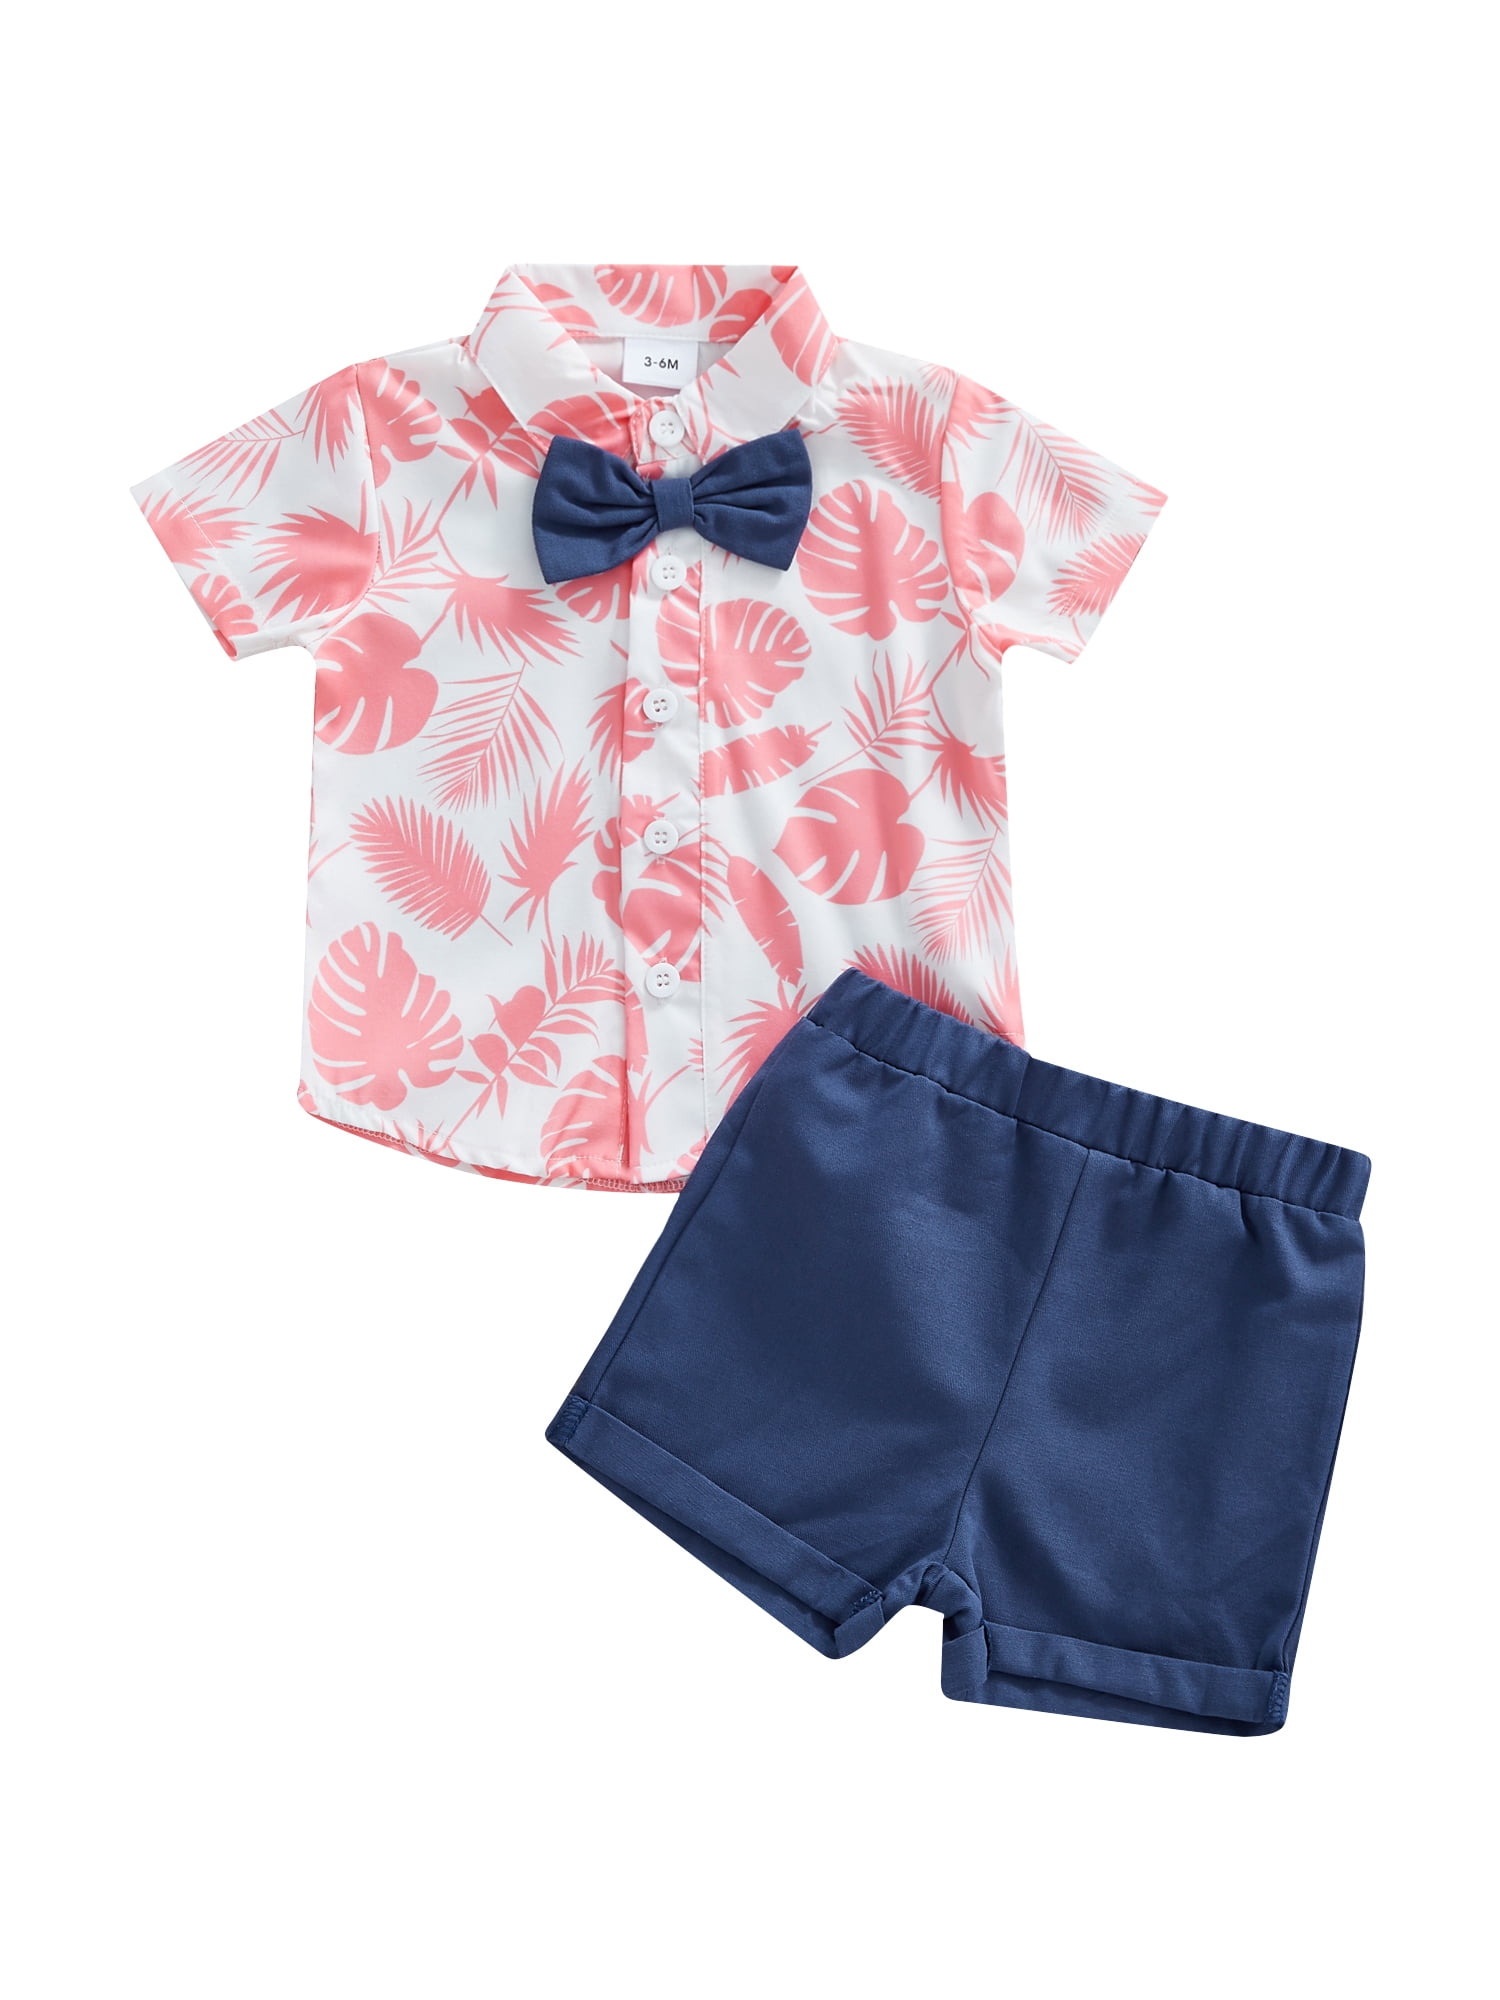 Toddler Baby Boy Short Sleeve Bow Tie Gentleman Leaf Printed Tops+Shorts Outfits 